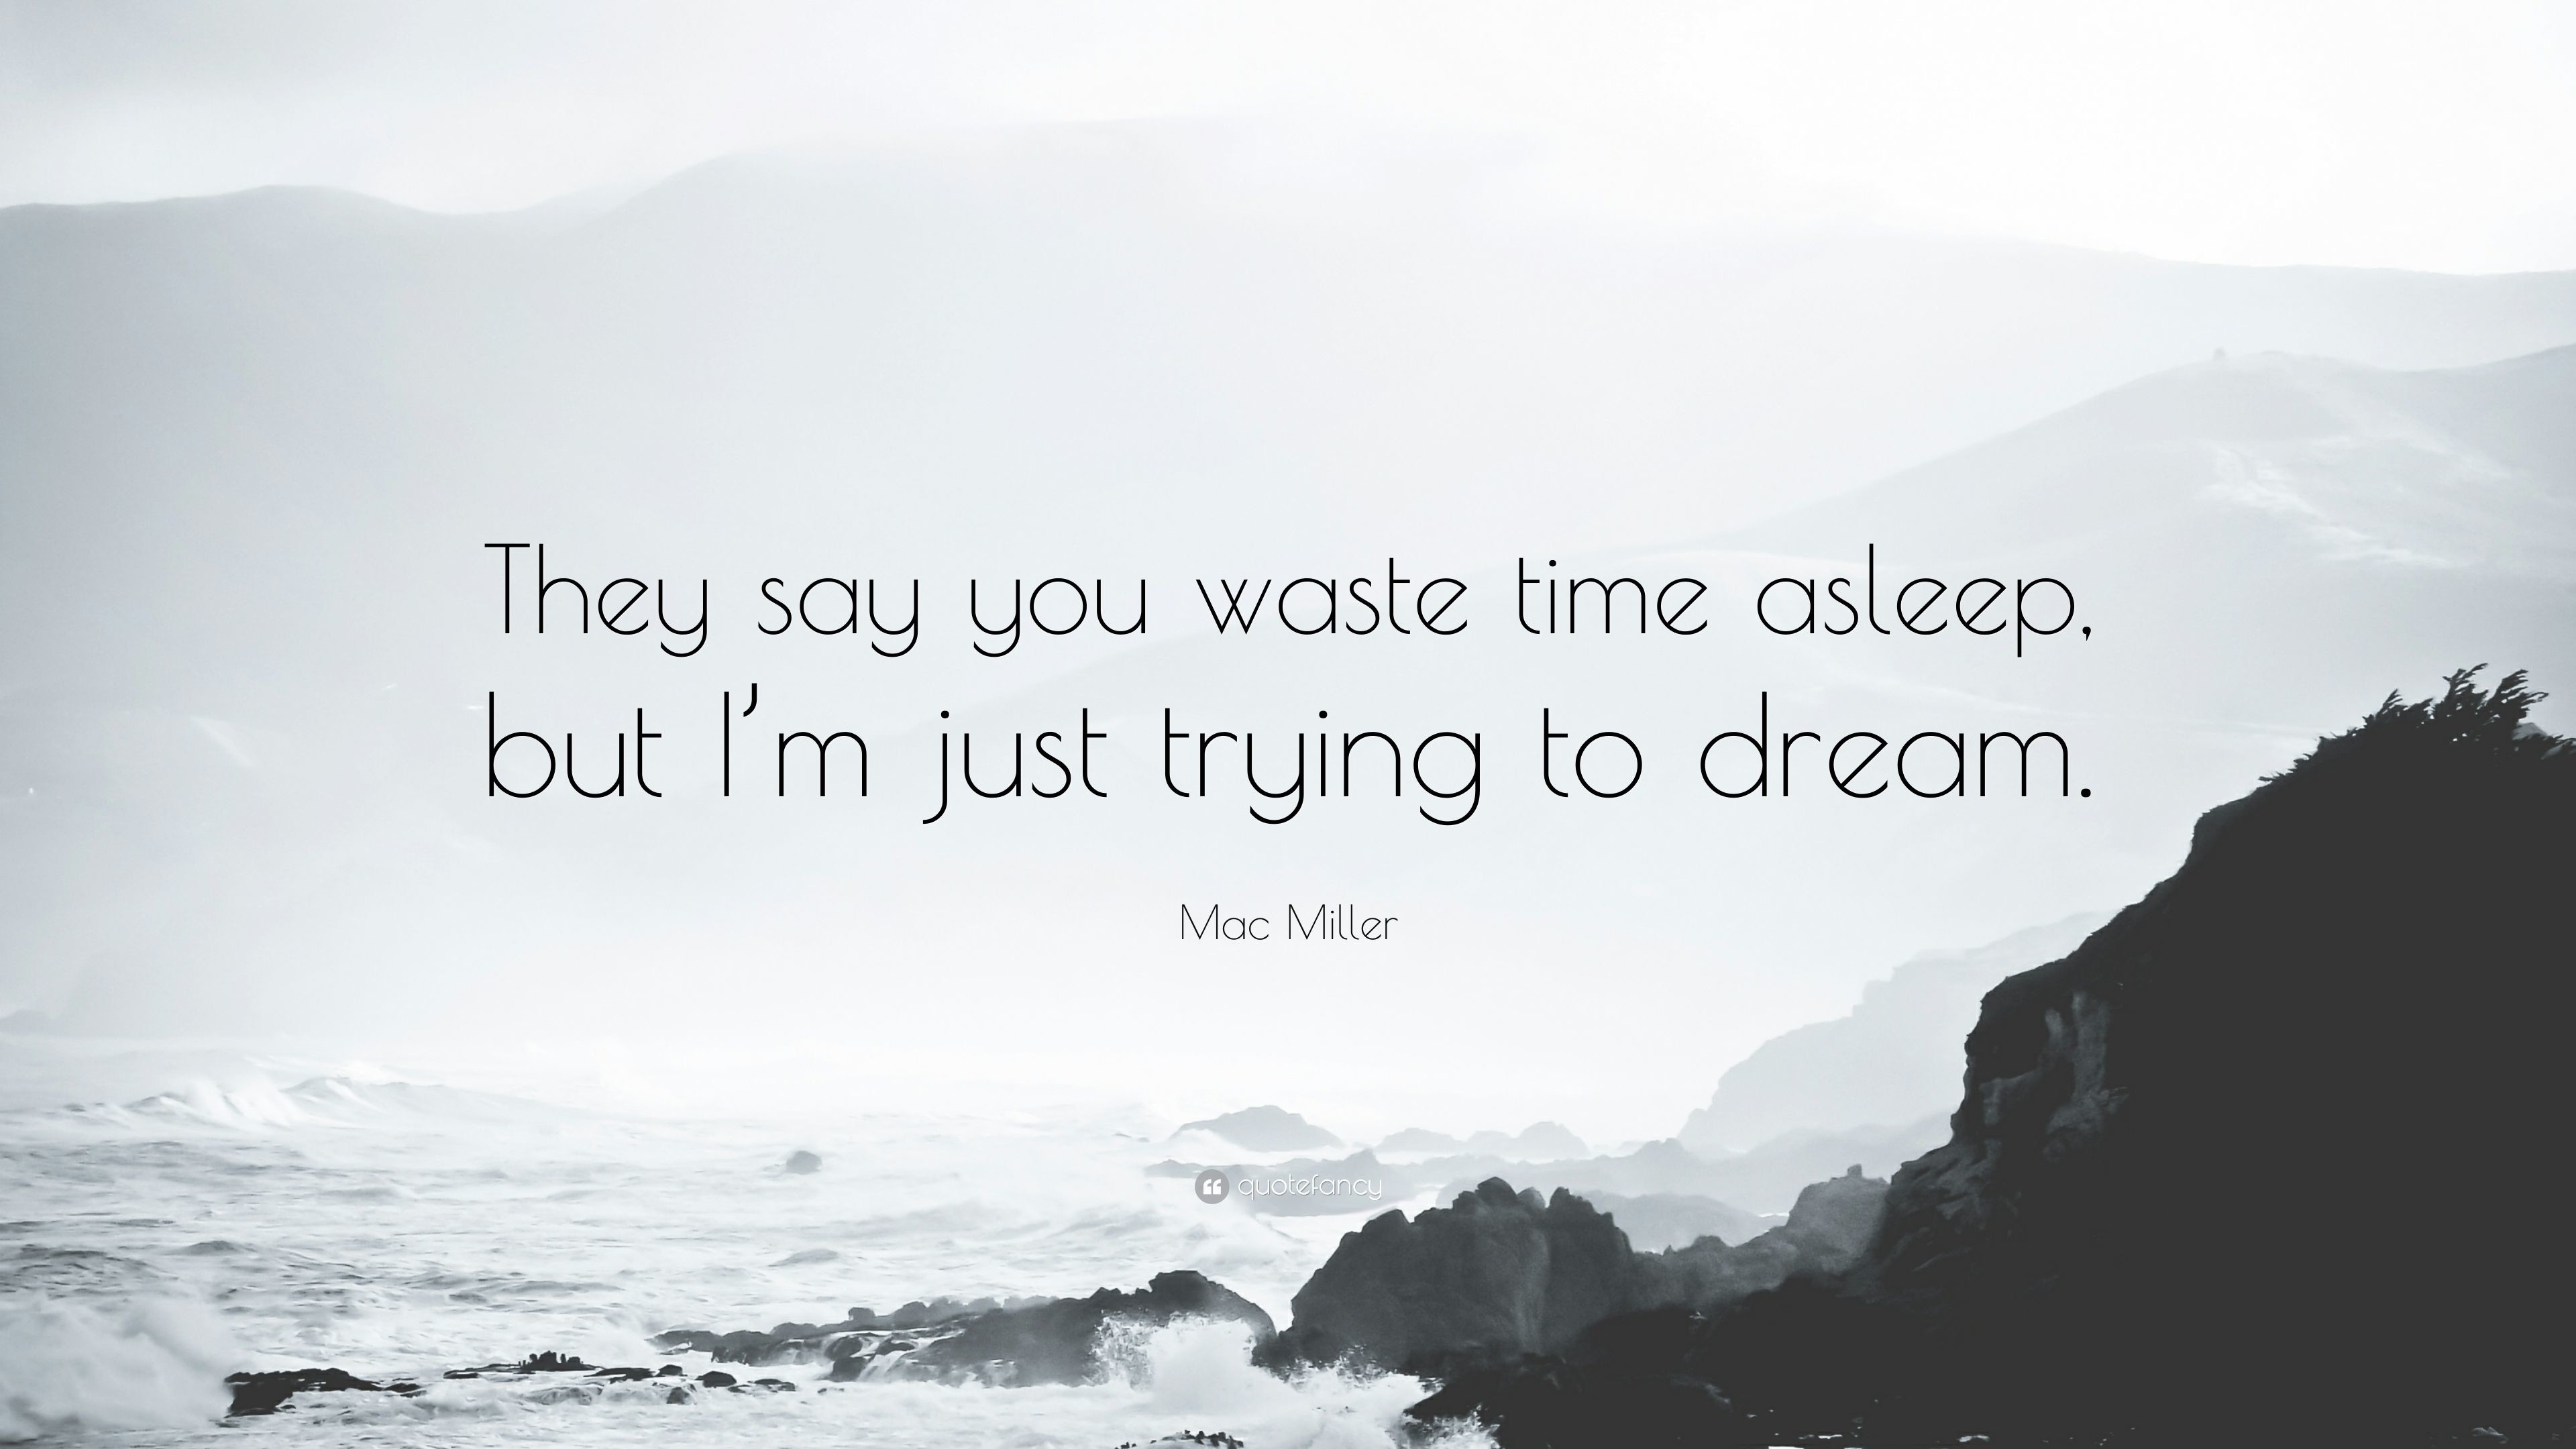 3840x2160 Mac Miller Quote: “They say you waste time asleep, but I'm